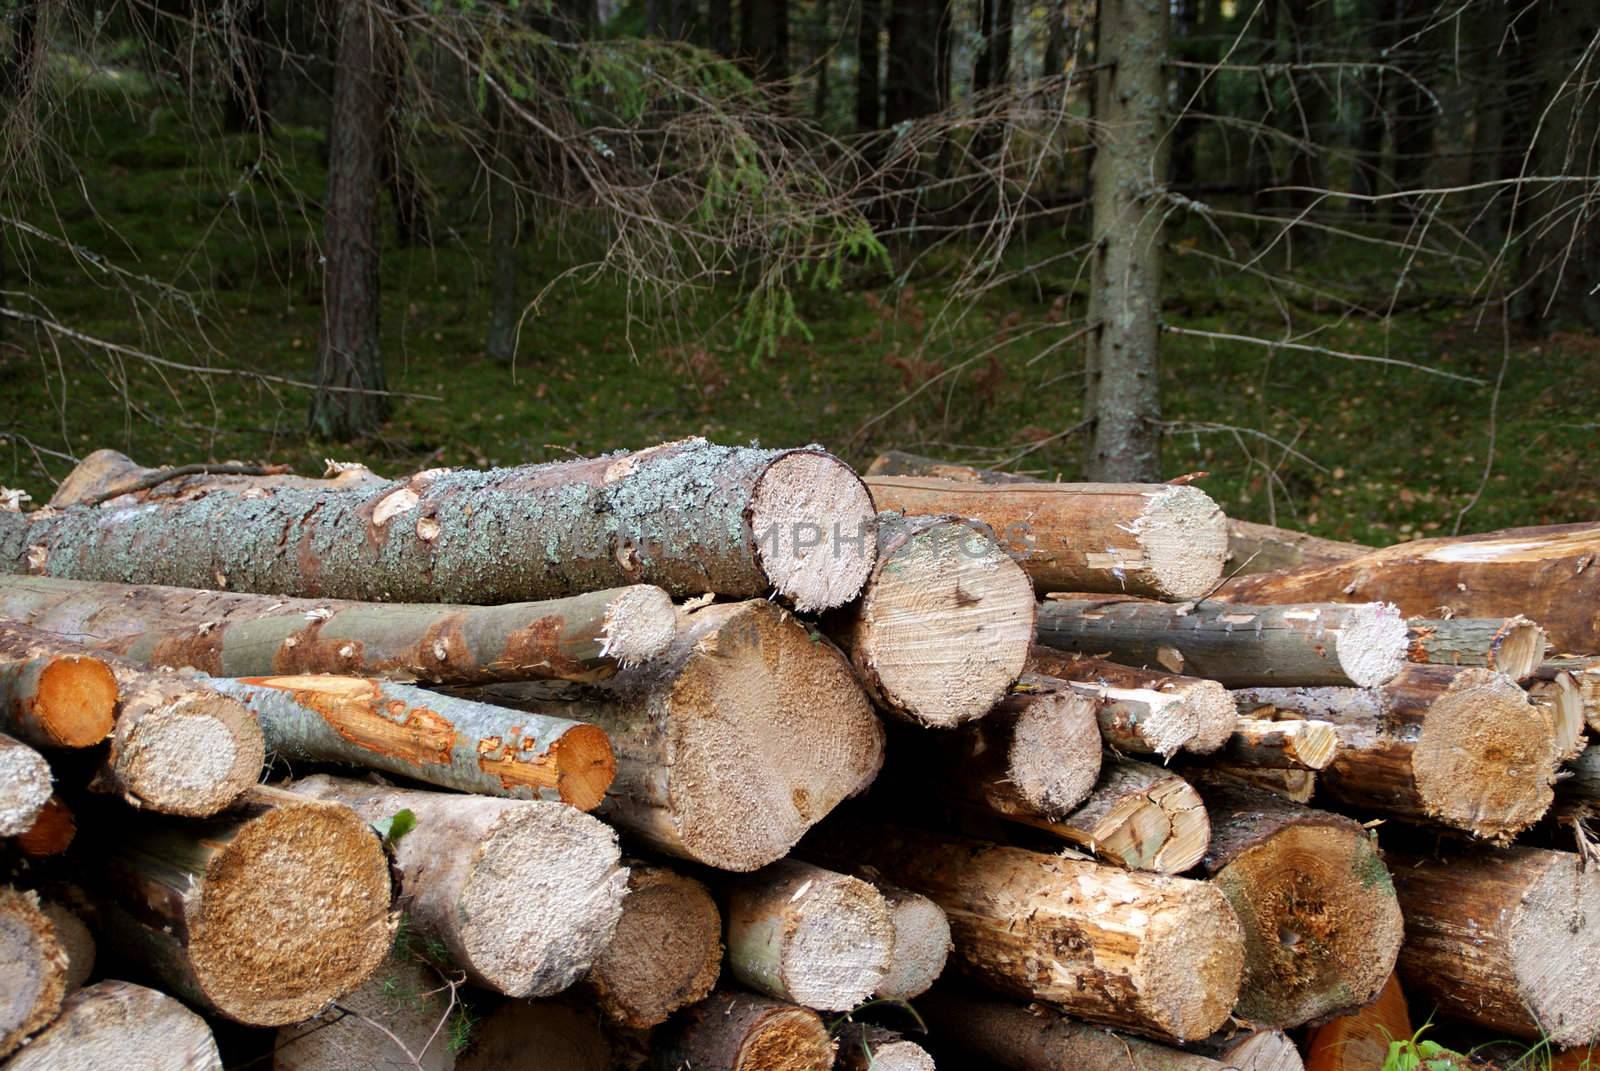 Detail of dry firewood stacked in forest near harvesting site. Photographed in Salo, Finland